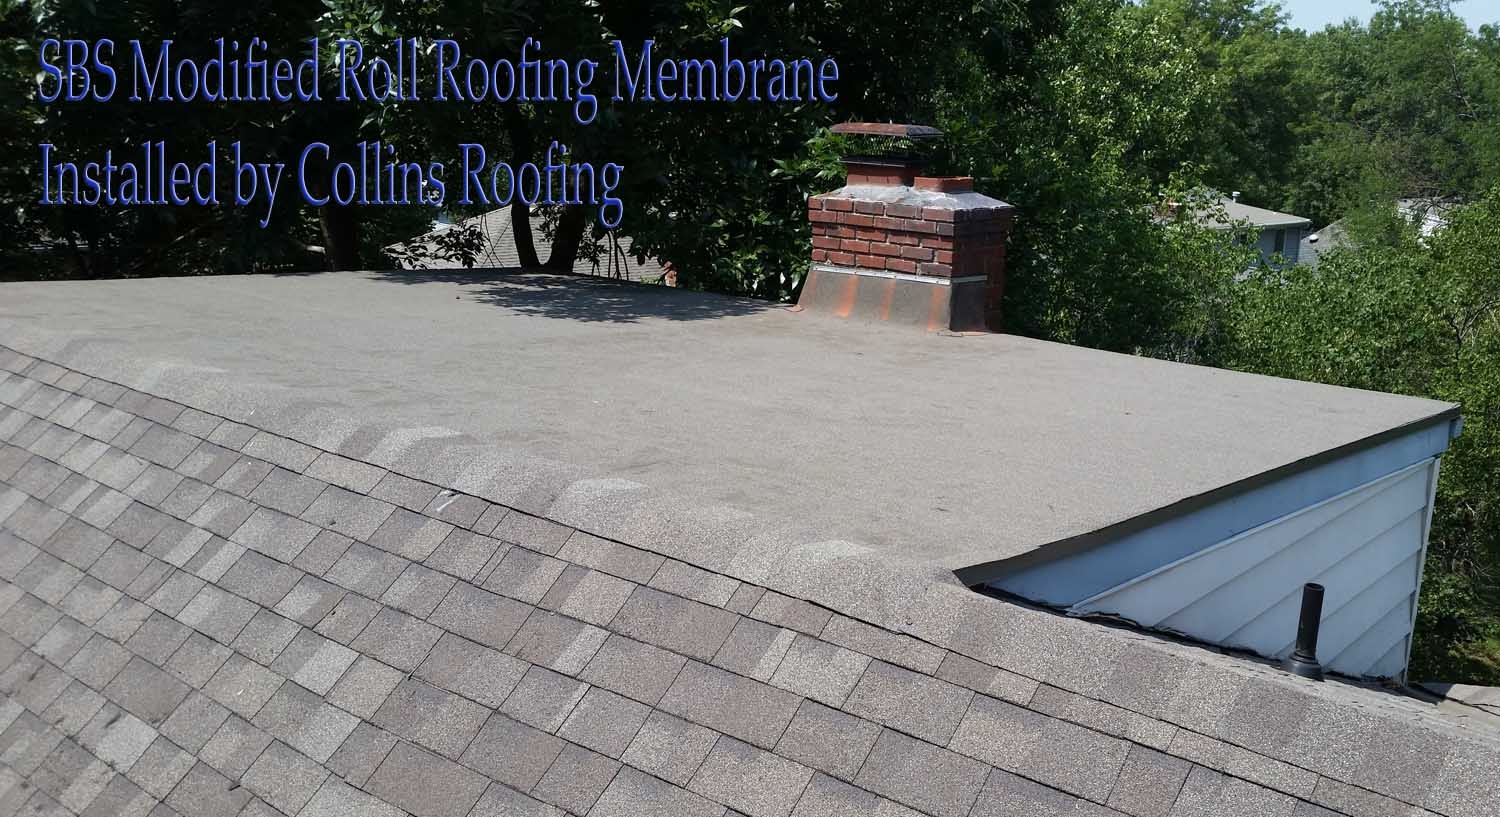 Roll Roofing on a homes Dormer Addition in Kansas City, MO Installed by Collins Roofing

Kansas City Roofing , Roofer in Kansas City